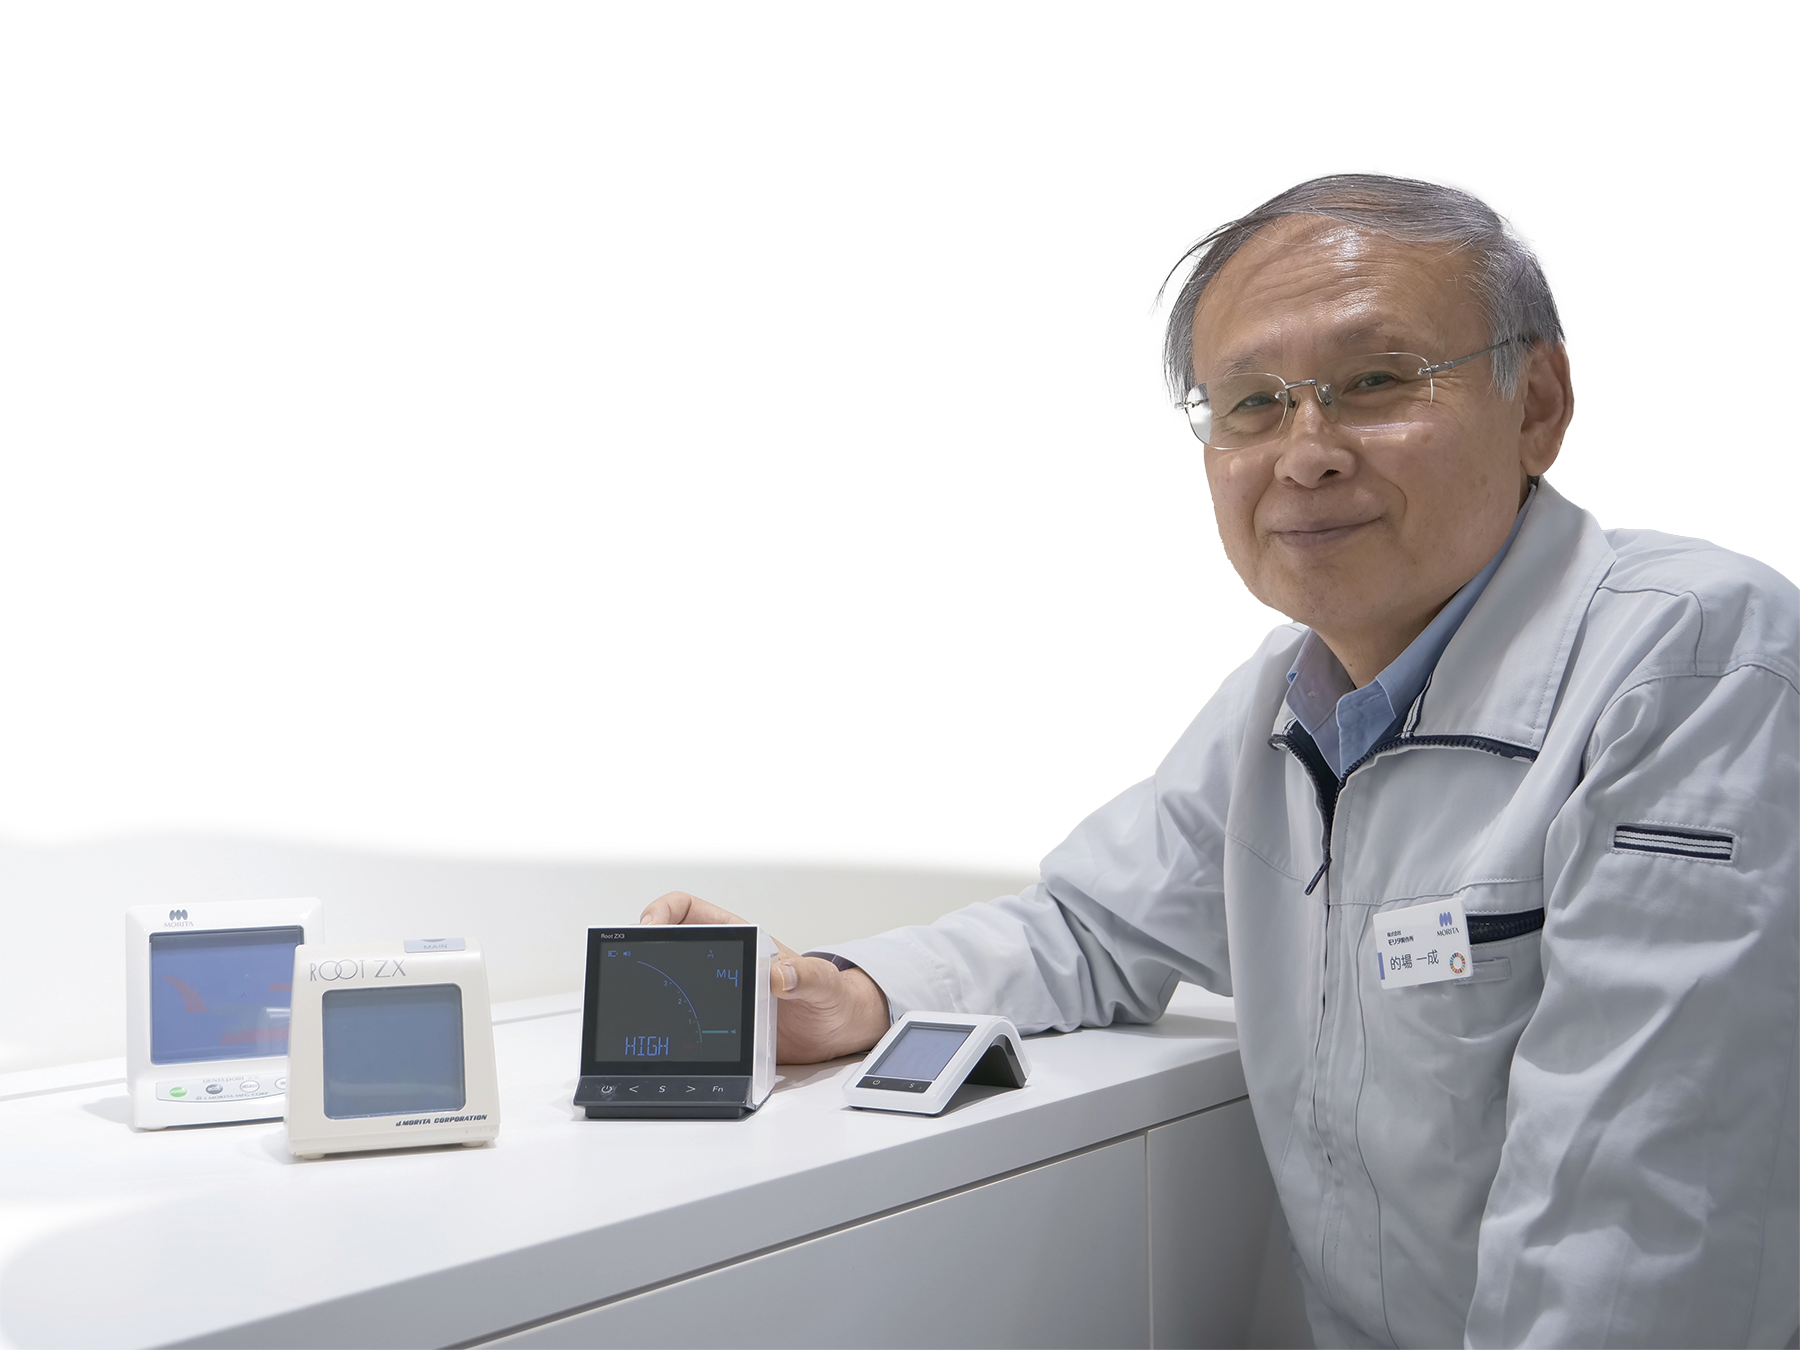 Kazunari Matoba Former General Manager of Research and Development, J MORITA MFG CORP – Pictured with (from left to right) Root ZX II, Root ZX, Root ZX3, Root ZX mini | Image Credit: © J MORITA MFG CORP